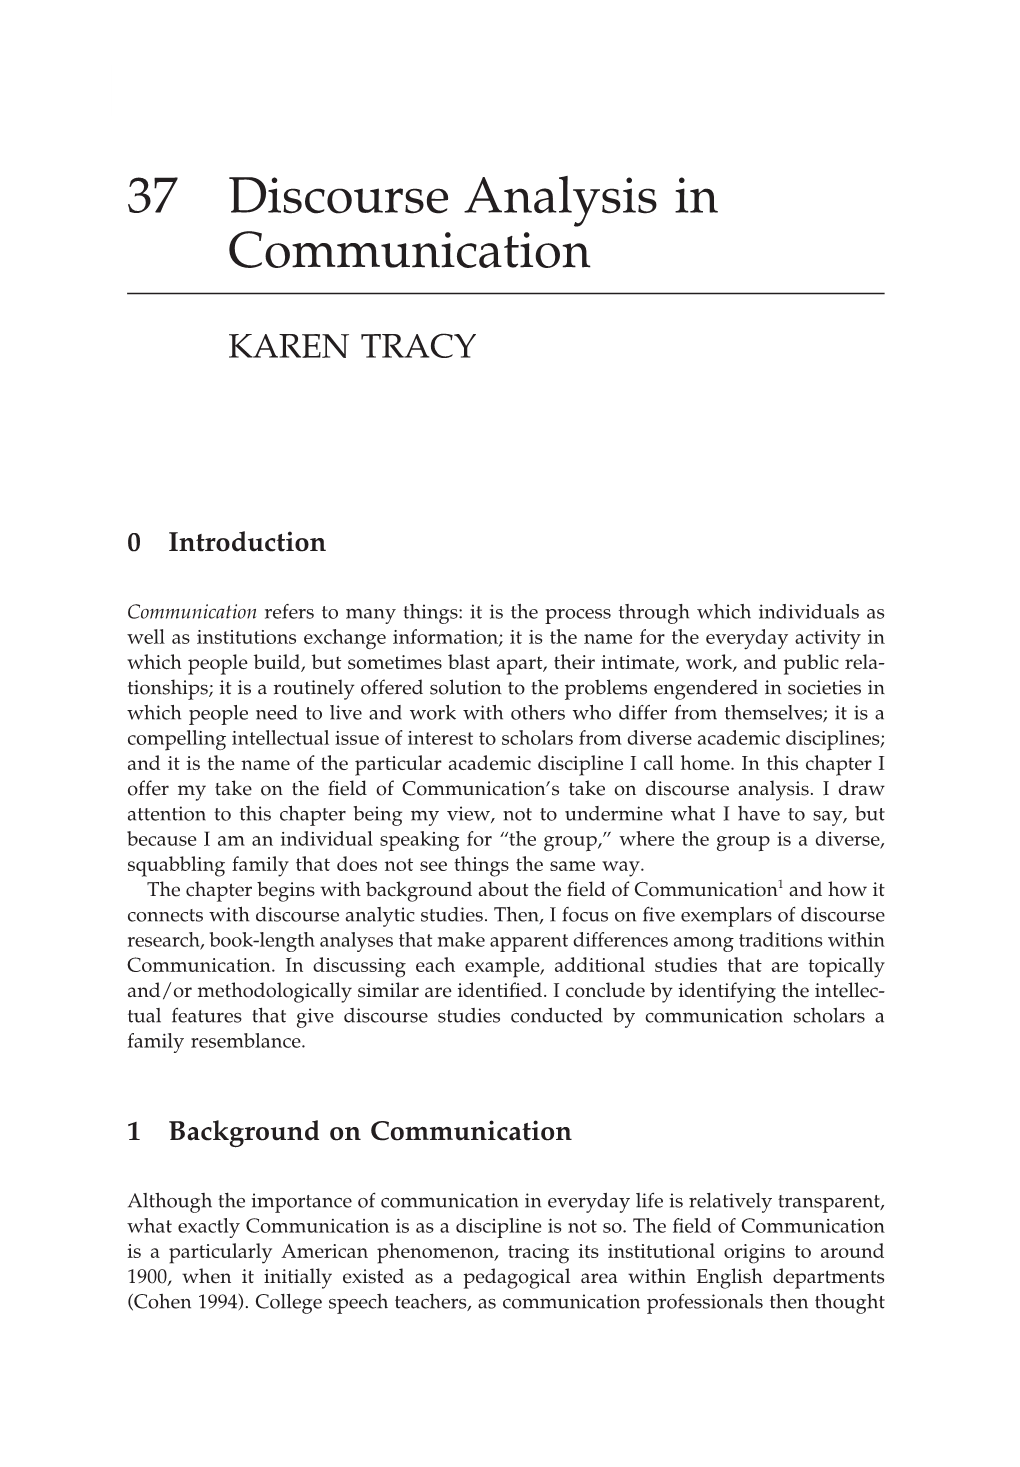 37 Discourse Analysis in Communication